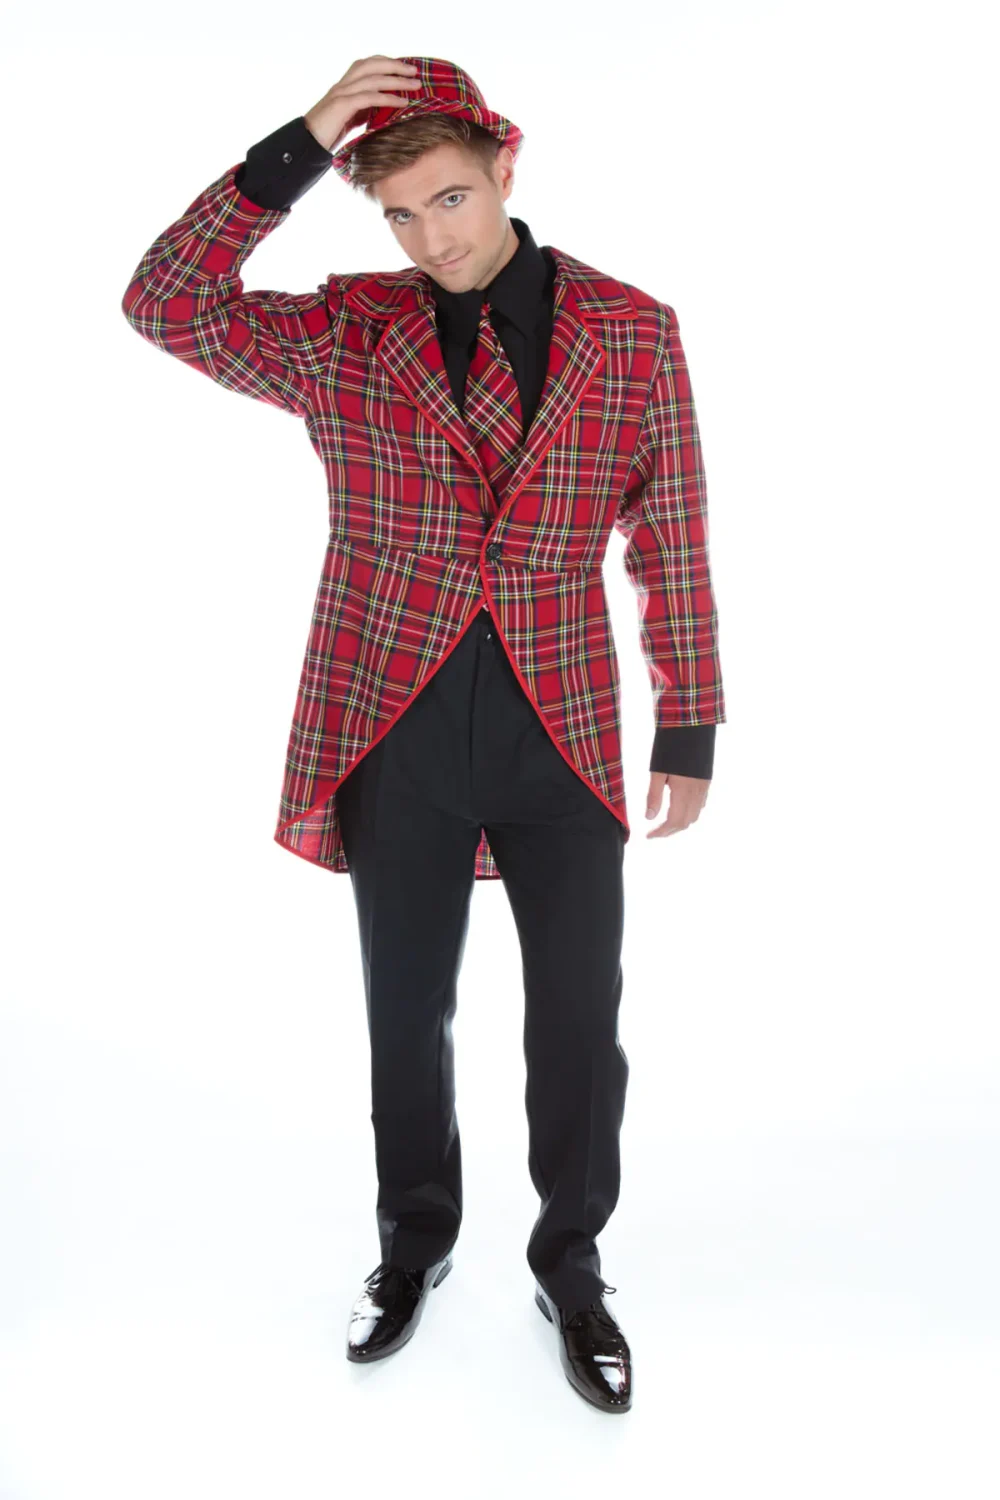 Men's Tartan Tail coat available in low prices here.